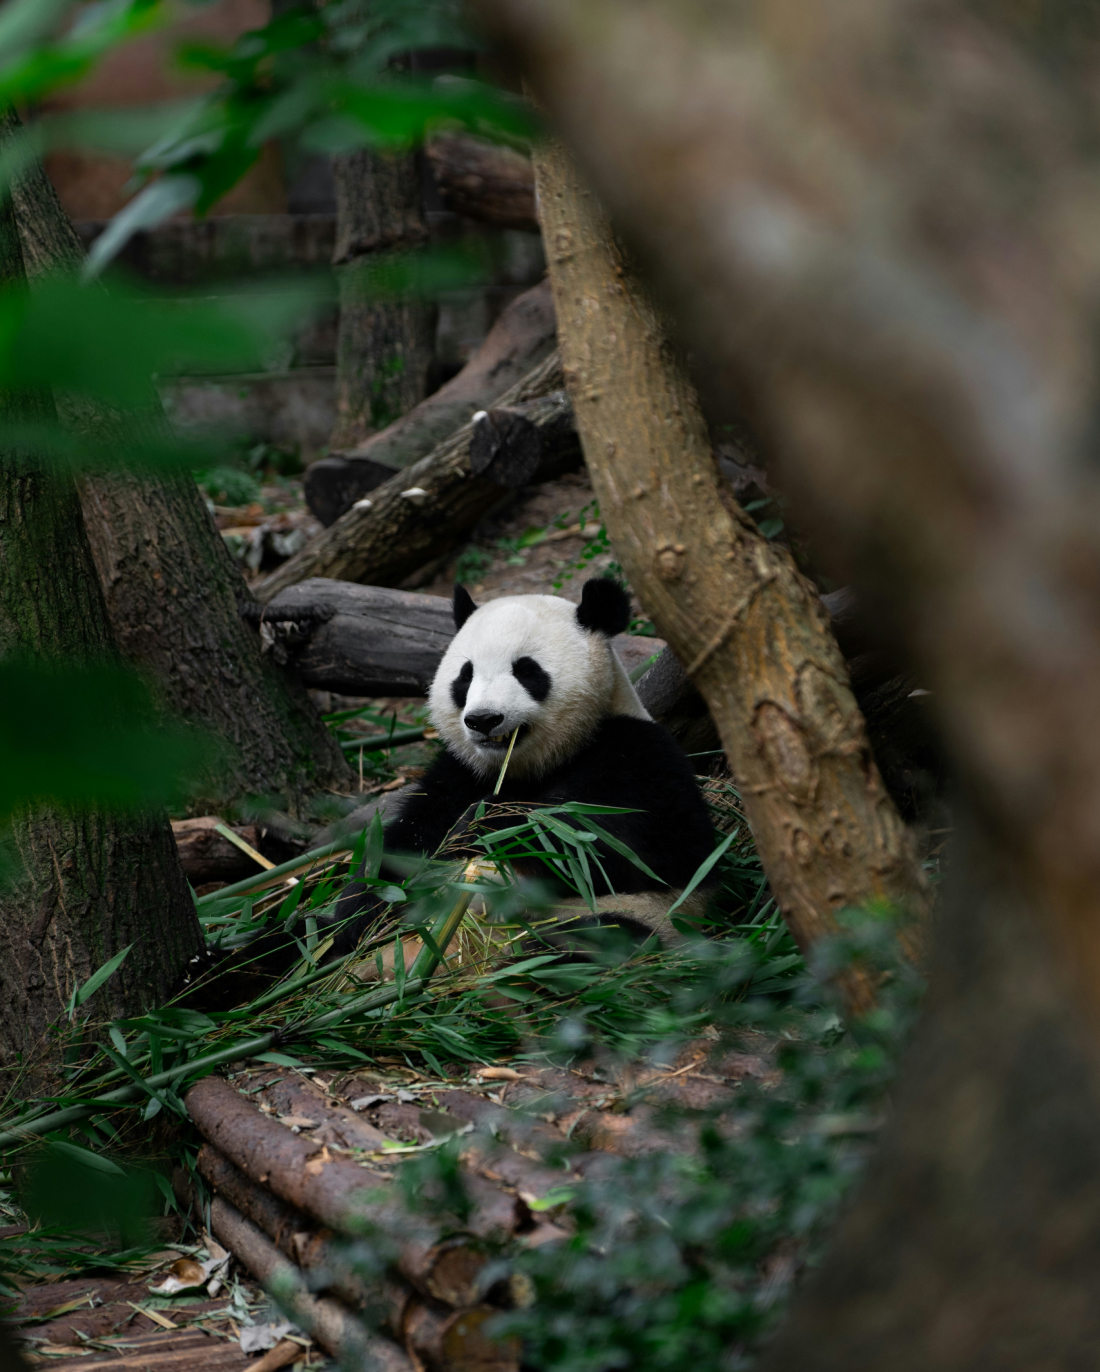 A giant panda sits among bamboo trees and logs, munching on bamboo leaves. The panda's black and white fur contrasts with the green foliage around it. The setting appears to be a natural enclosure in a zoo or sanctuary.